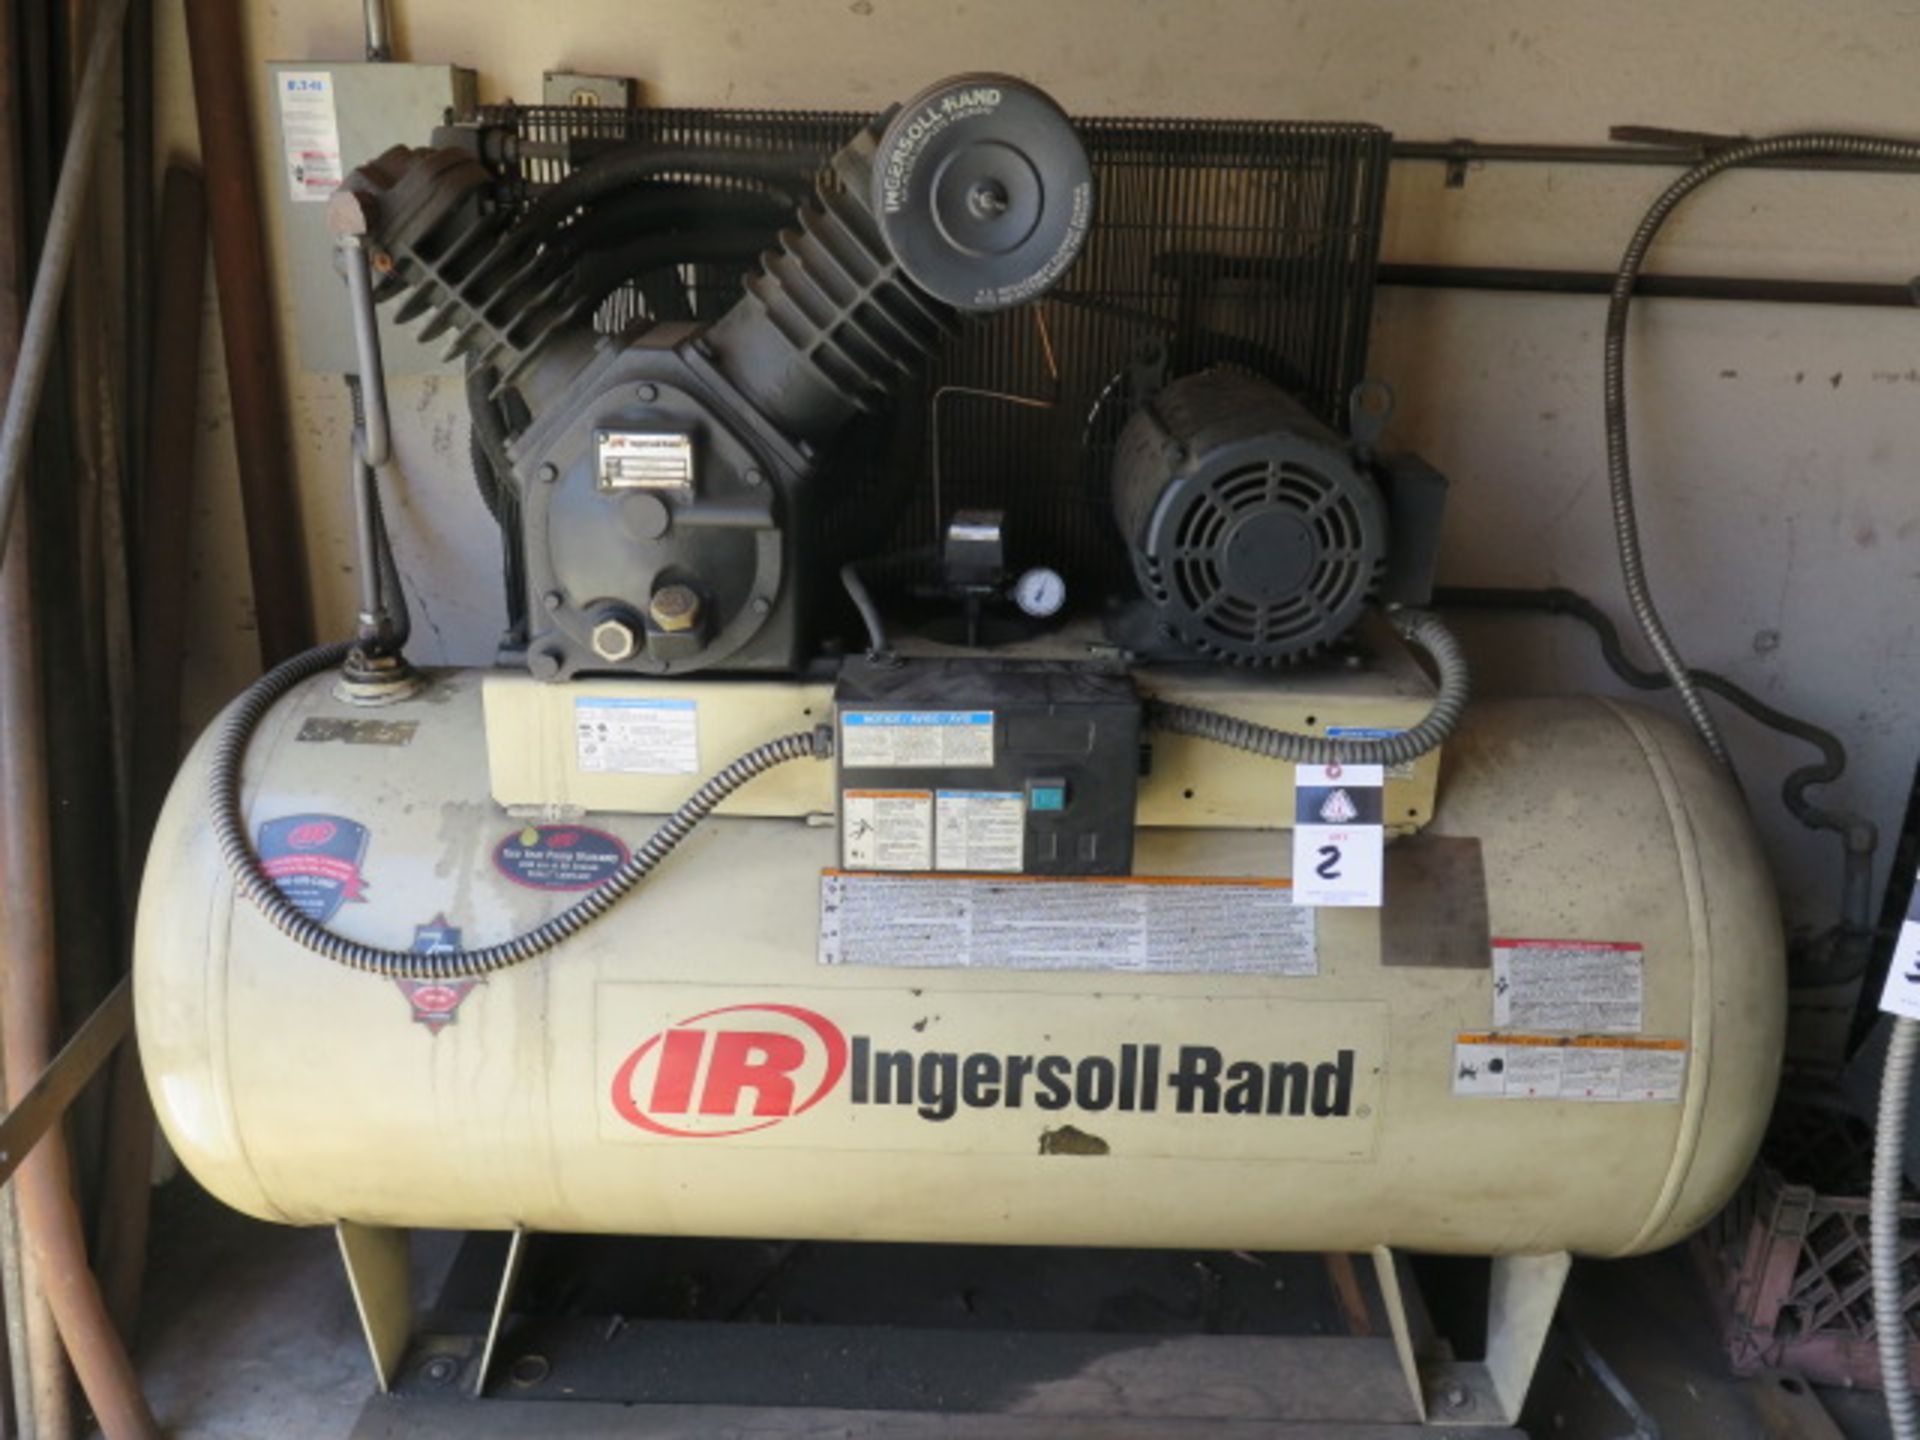 Ingersoll Rand 10Hp Horizontal Air Compressor w/ 2-Stage Pump, 80 Gallon Tank (SOLD AS-IS – NO WARRA